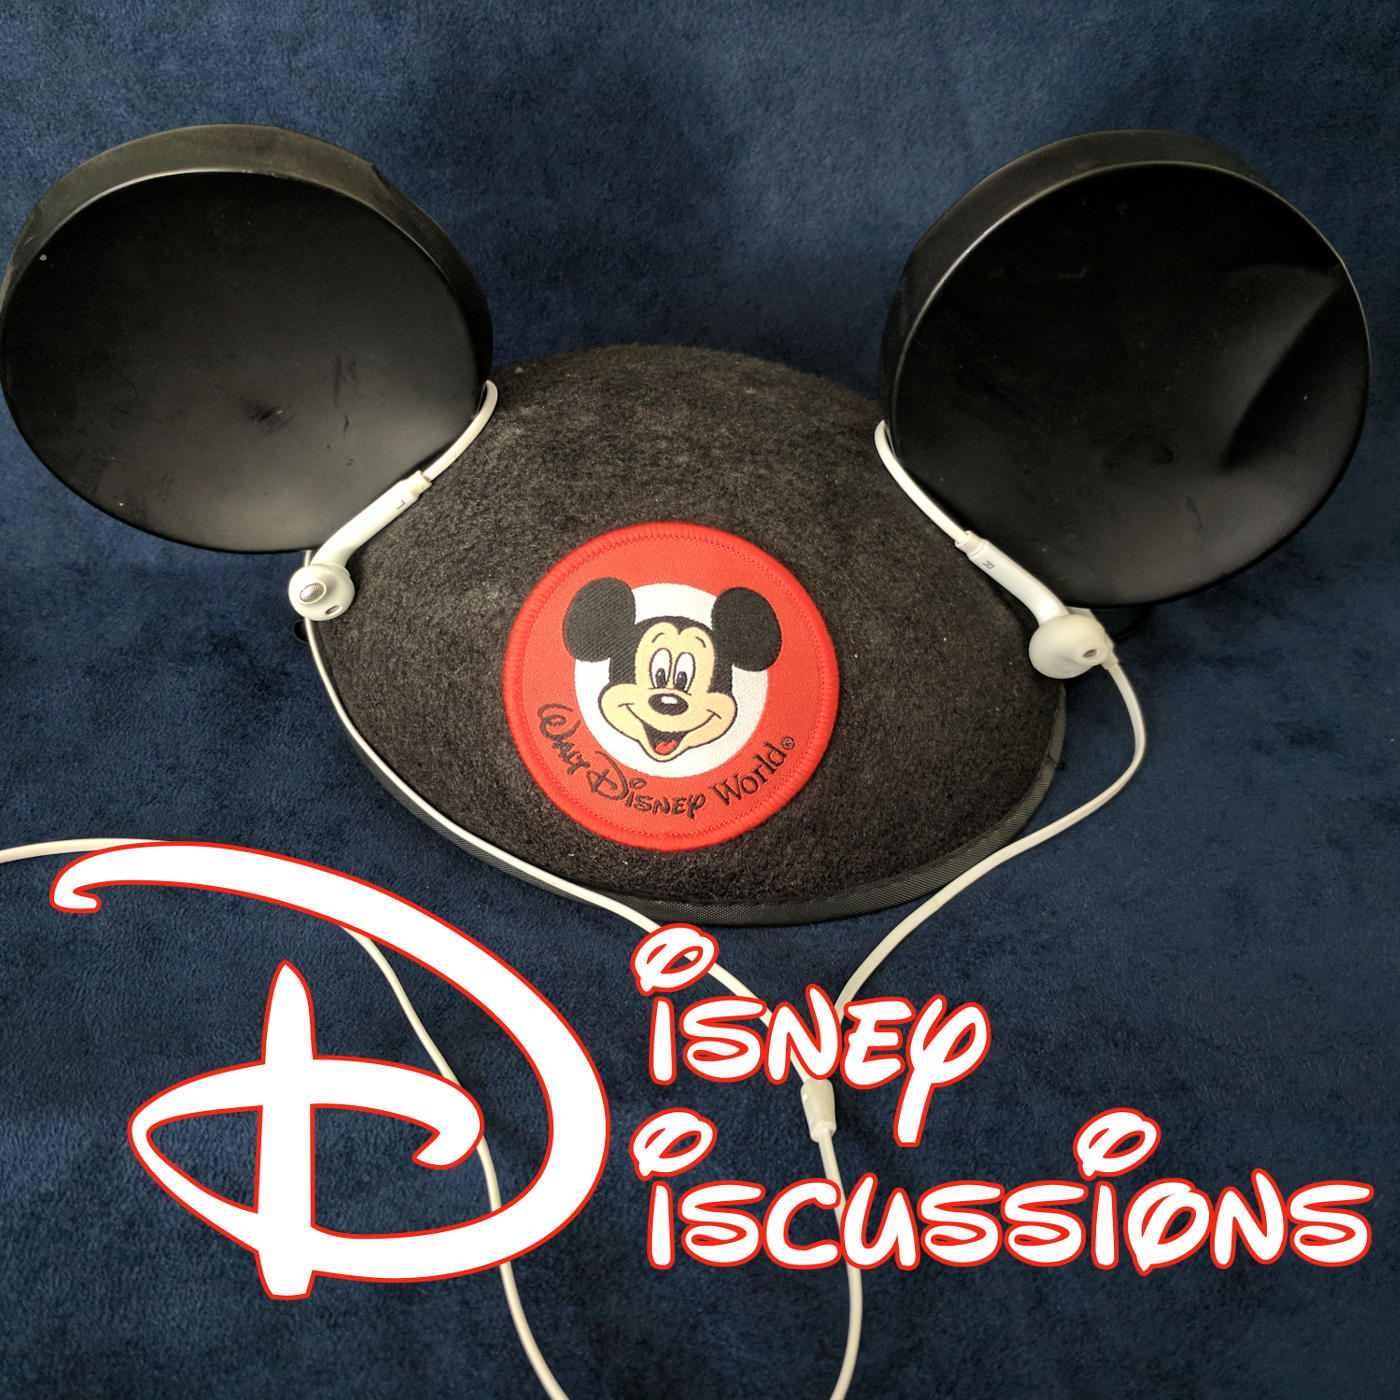 New Guardians of the Galaxy Roller Coaster, Spider-man ride, and bottomless milkshakes plus our favorite Hollywood Studios and EPCOT rides - Disney Discussion Episode 7